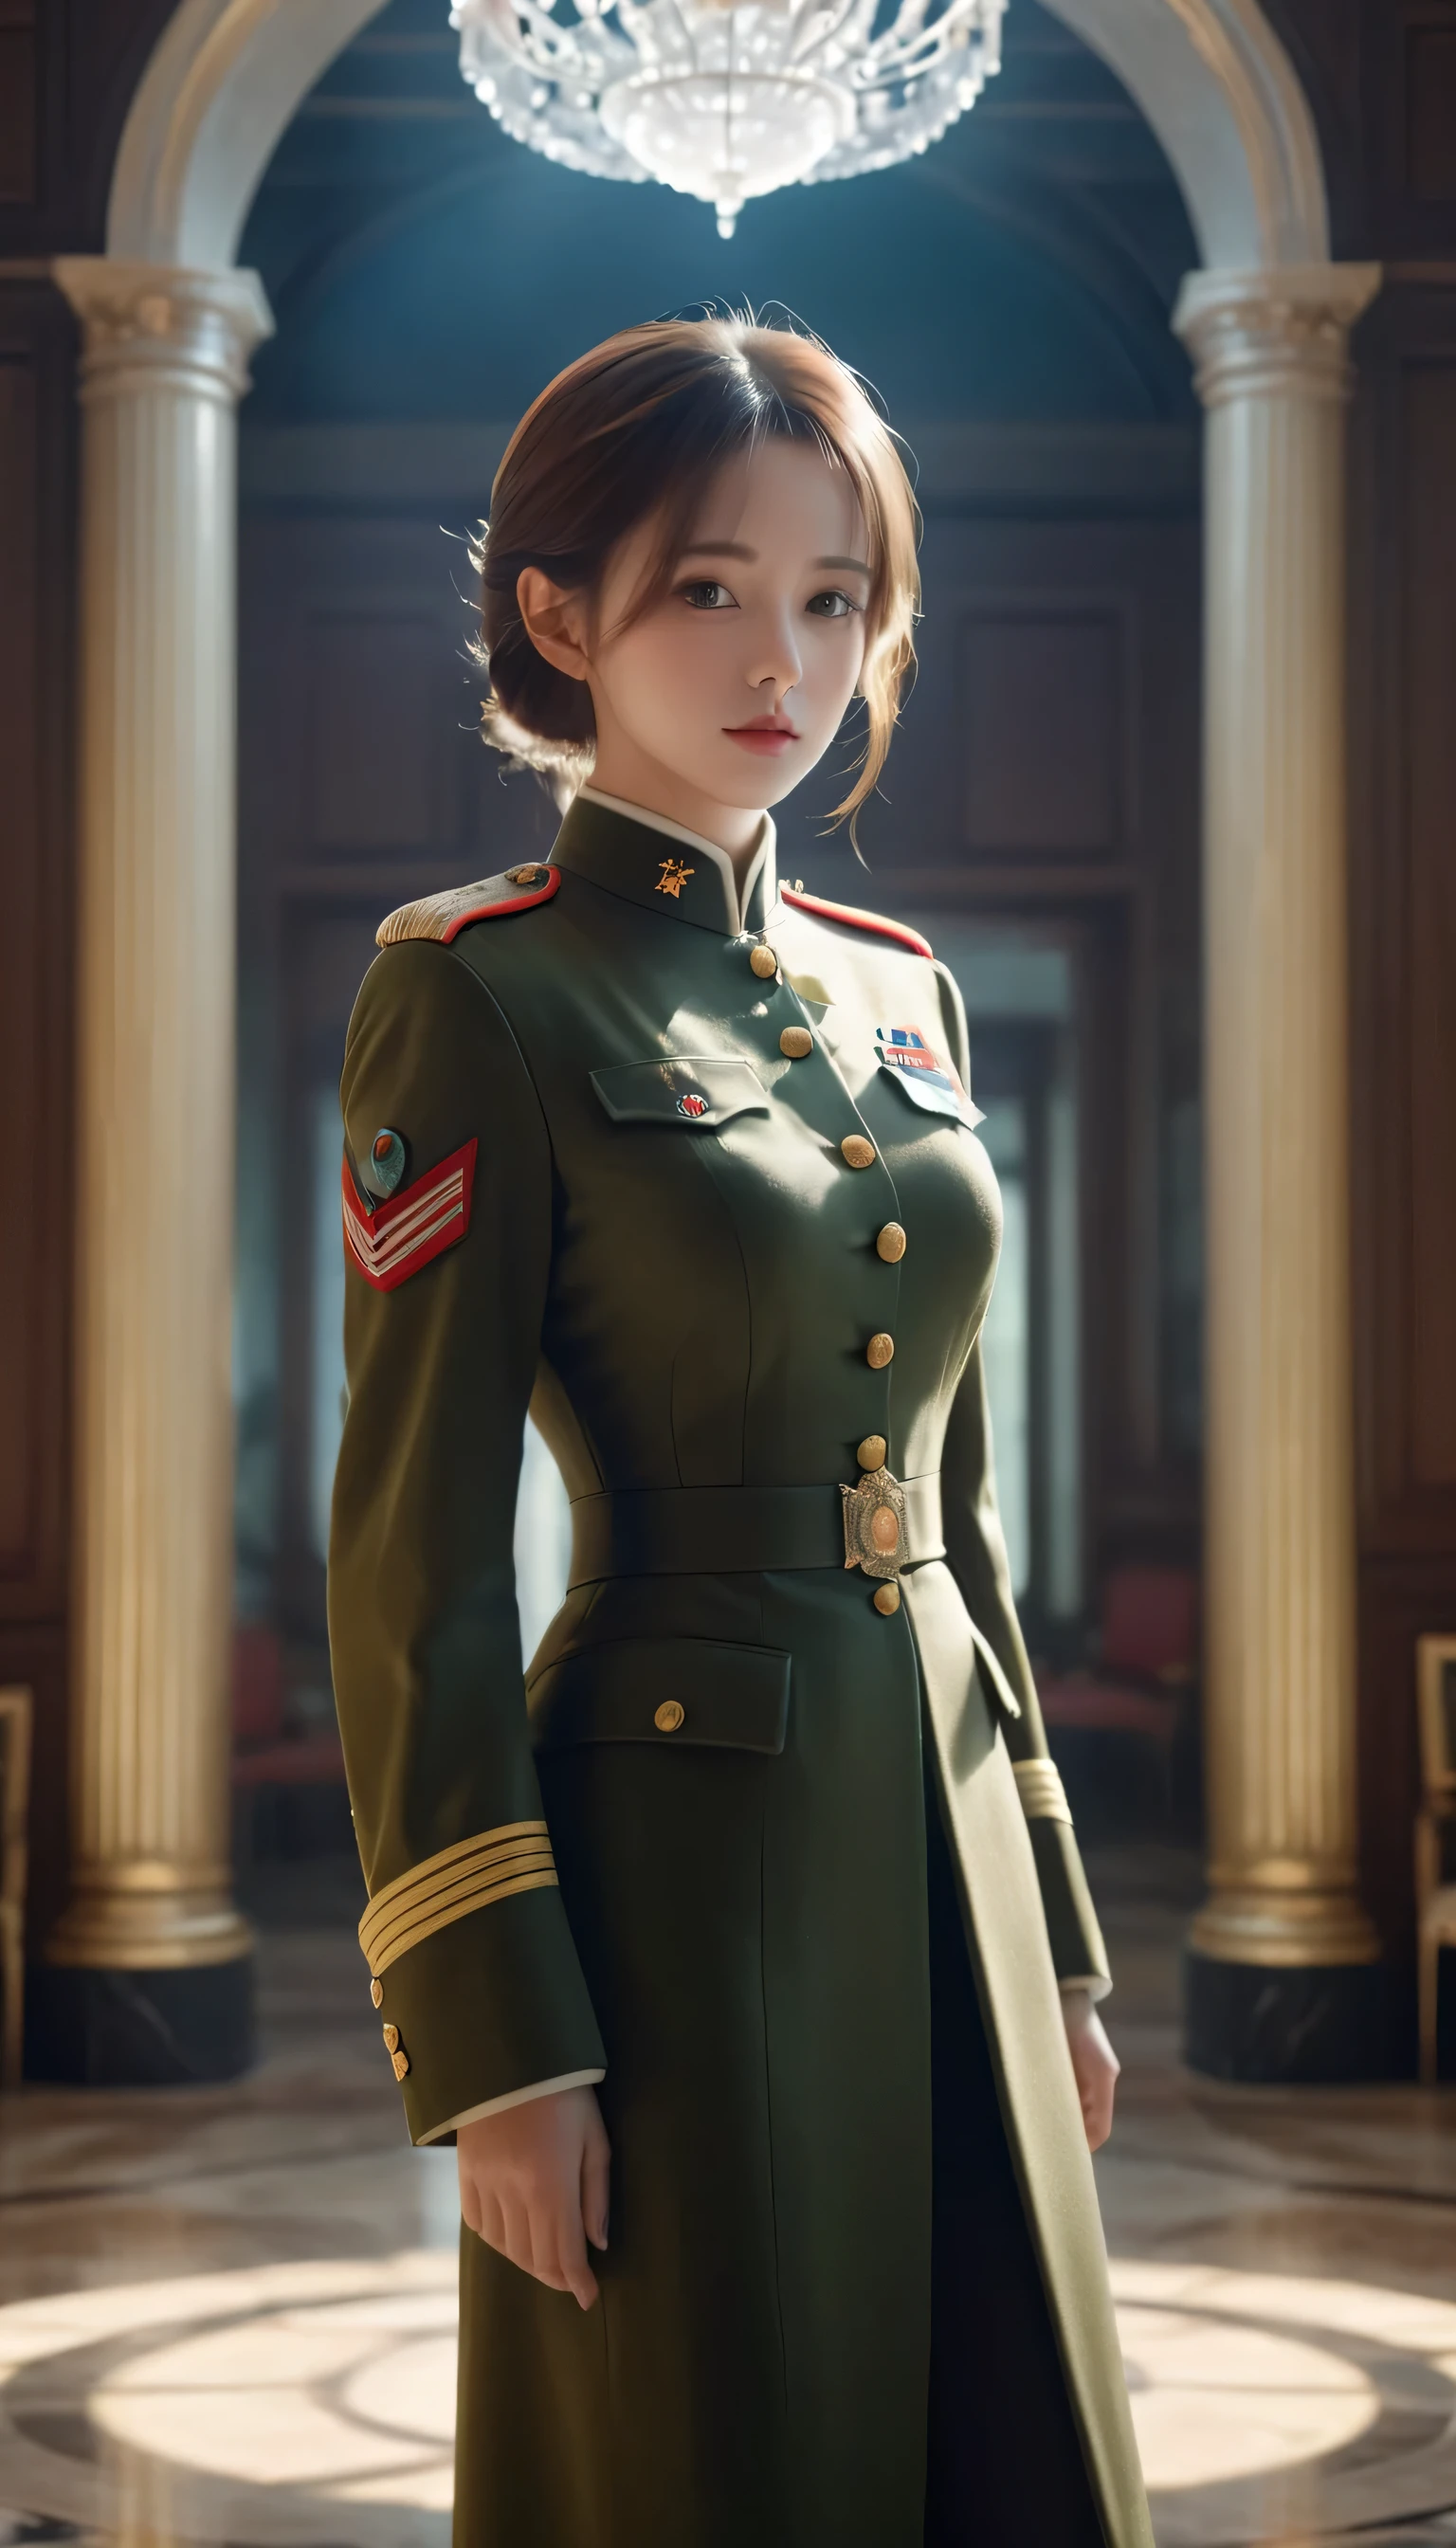 1 girl,wearing military uniform，Ball head expert,4K, high resolution, masterpiece, best quality, head:1.3,((Hasselblad Photography)), Delicate skin, sharp focus, (movie lighting), soft light, Dynamic angle, [:(Detailed face:1.2):0.2], medium breasts,(((Inside the mansion))),